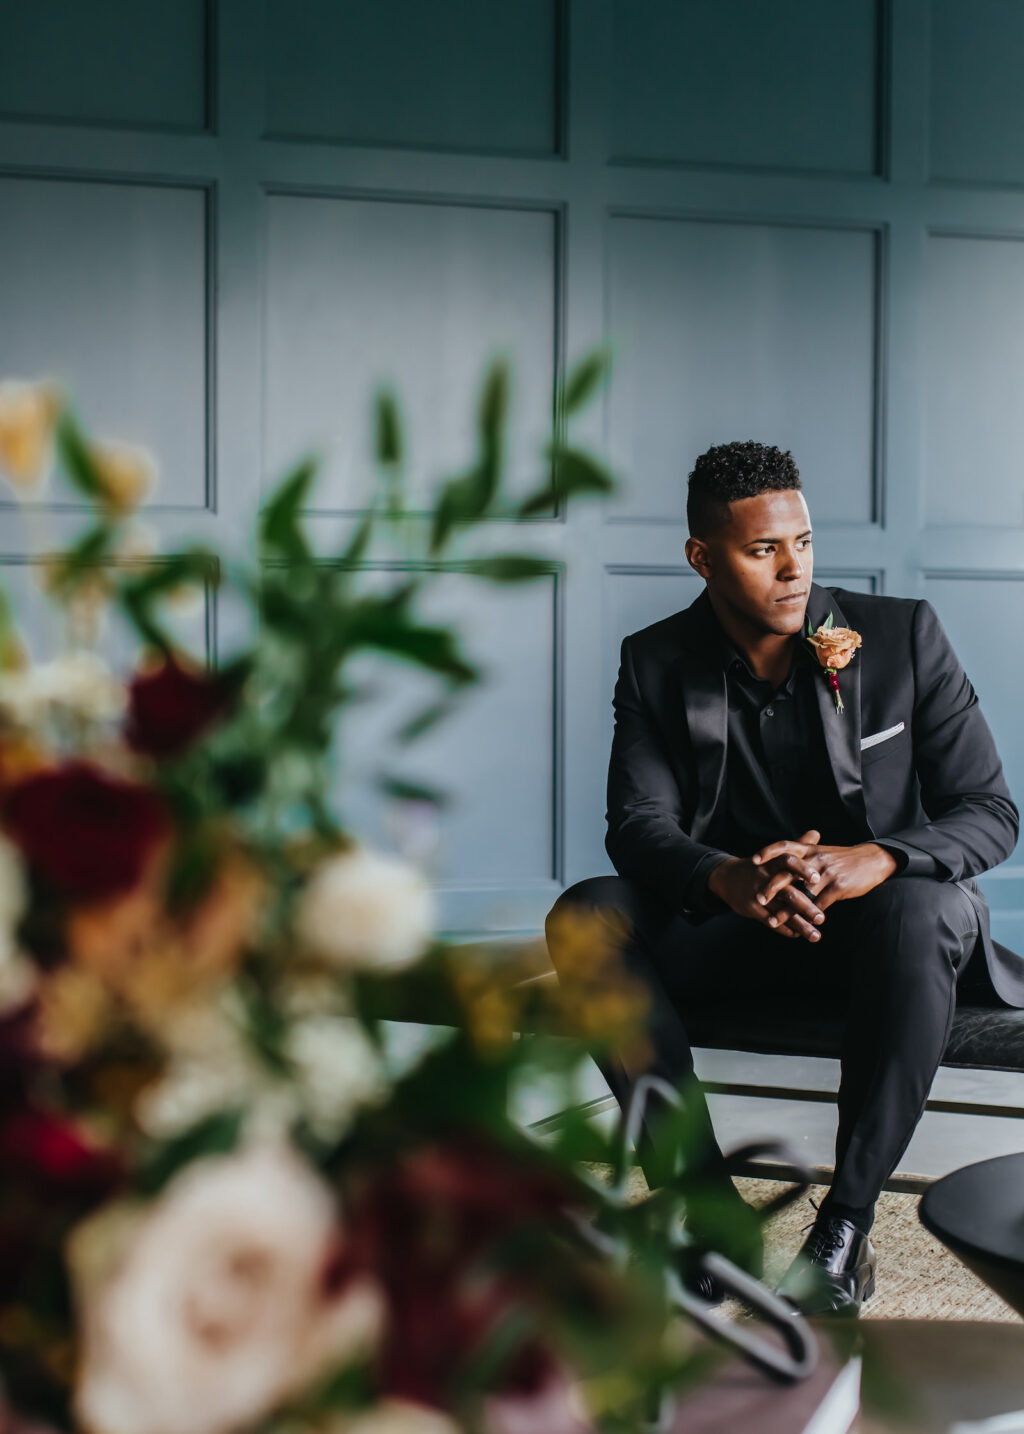 Modern and Edgy Fall Wedding, Tampa Groom Wearing All Black Tuxedo and Peach Rose Boutonniere | Tampa Bay Wedding Venue Hyde House